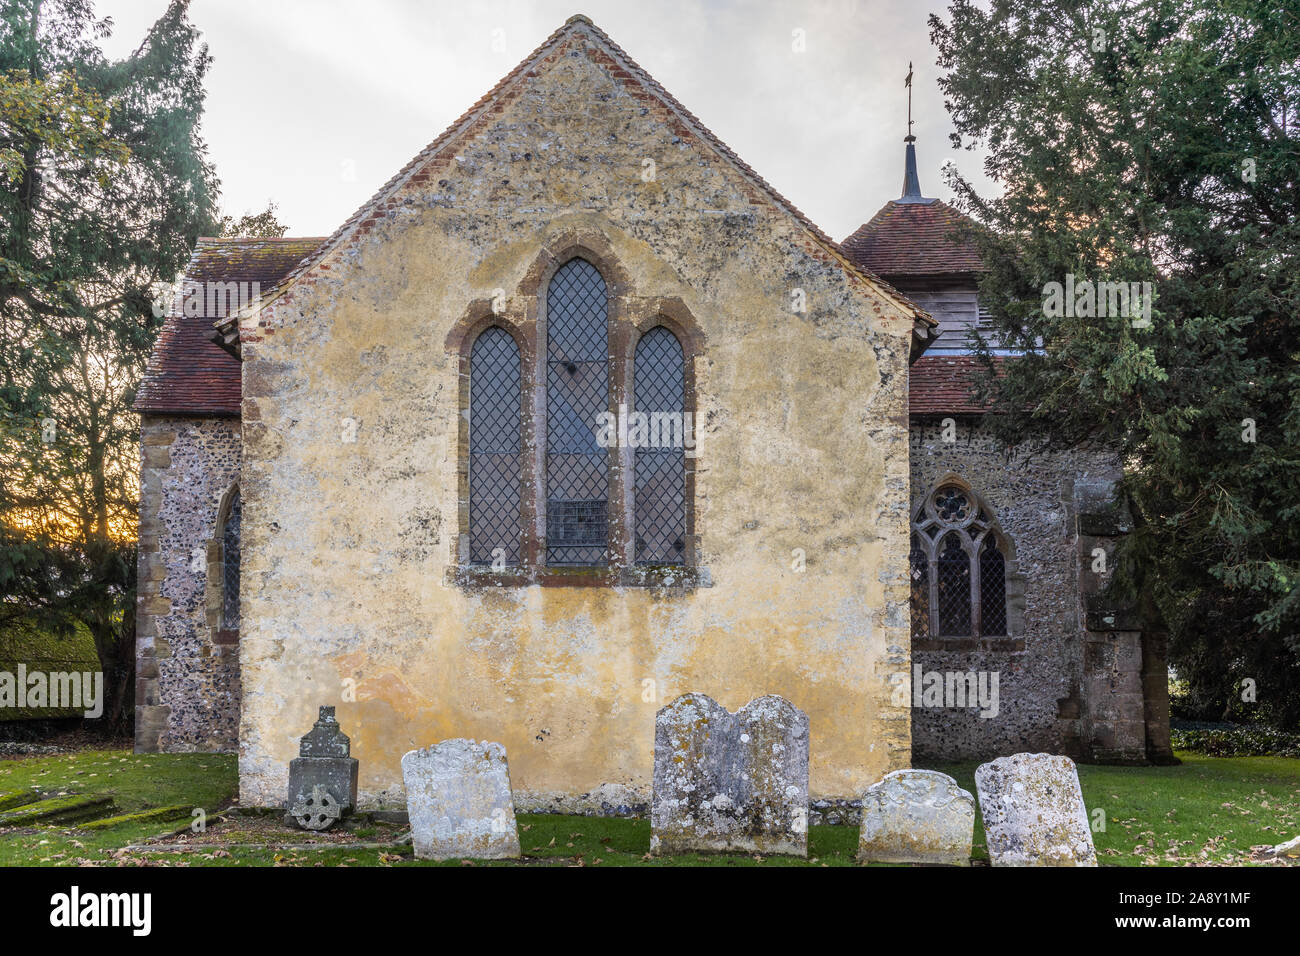 The redundant Church of St Mary the Virgin in North Stoke, West Sussex, now in the care of the Churches Conservation Trust, England, UK Stock Photo